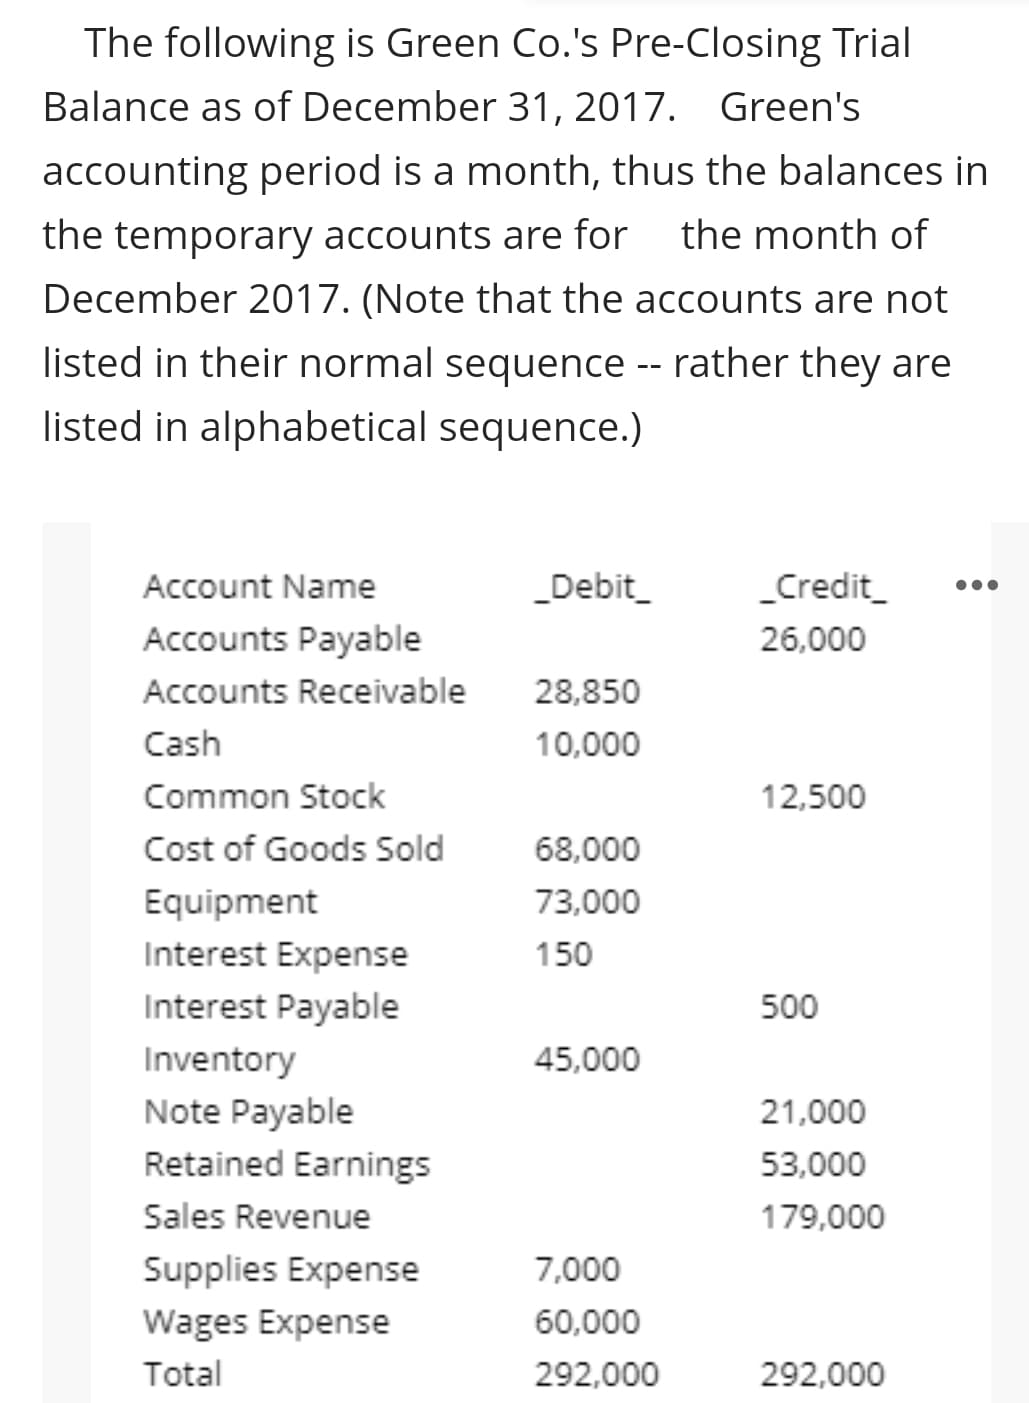 The following is Green Co.'s Pre-Closing Trial
Balance as of December 31, 2017. Green's
accounting period is a month, thus the balances in
the temporary accounts are for
the month of
December 2017. (Note that the accounts are not
listed in their normal sequence -- rather they are
listed in alphabetical sequence.)
Account Name
_Debit_
_Credit_
Accounts Payable
26,000
Accounts Receivable
28,850
Cash
10,000
Common Stock
12,500
Cost of Goods Sold
68,000
Equipment
73,000
Interest Expense
150
Interest Payable
500
Inventory
45,000
Note Payable
21,000
Retained Earnings
53,000
Sales Revenue
179,000
Supplies Expense
7,000
Wages Expense
60,000
Total
292,000
292,000
